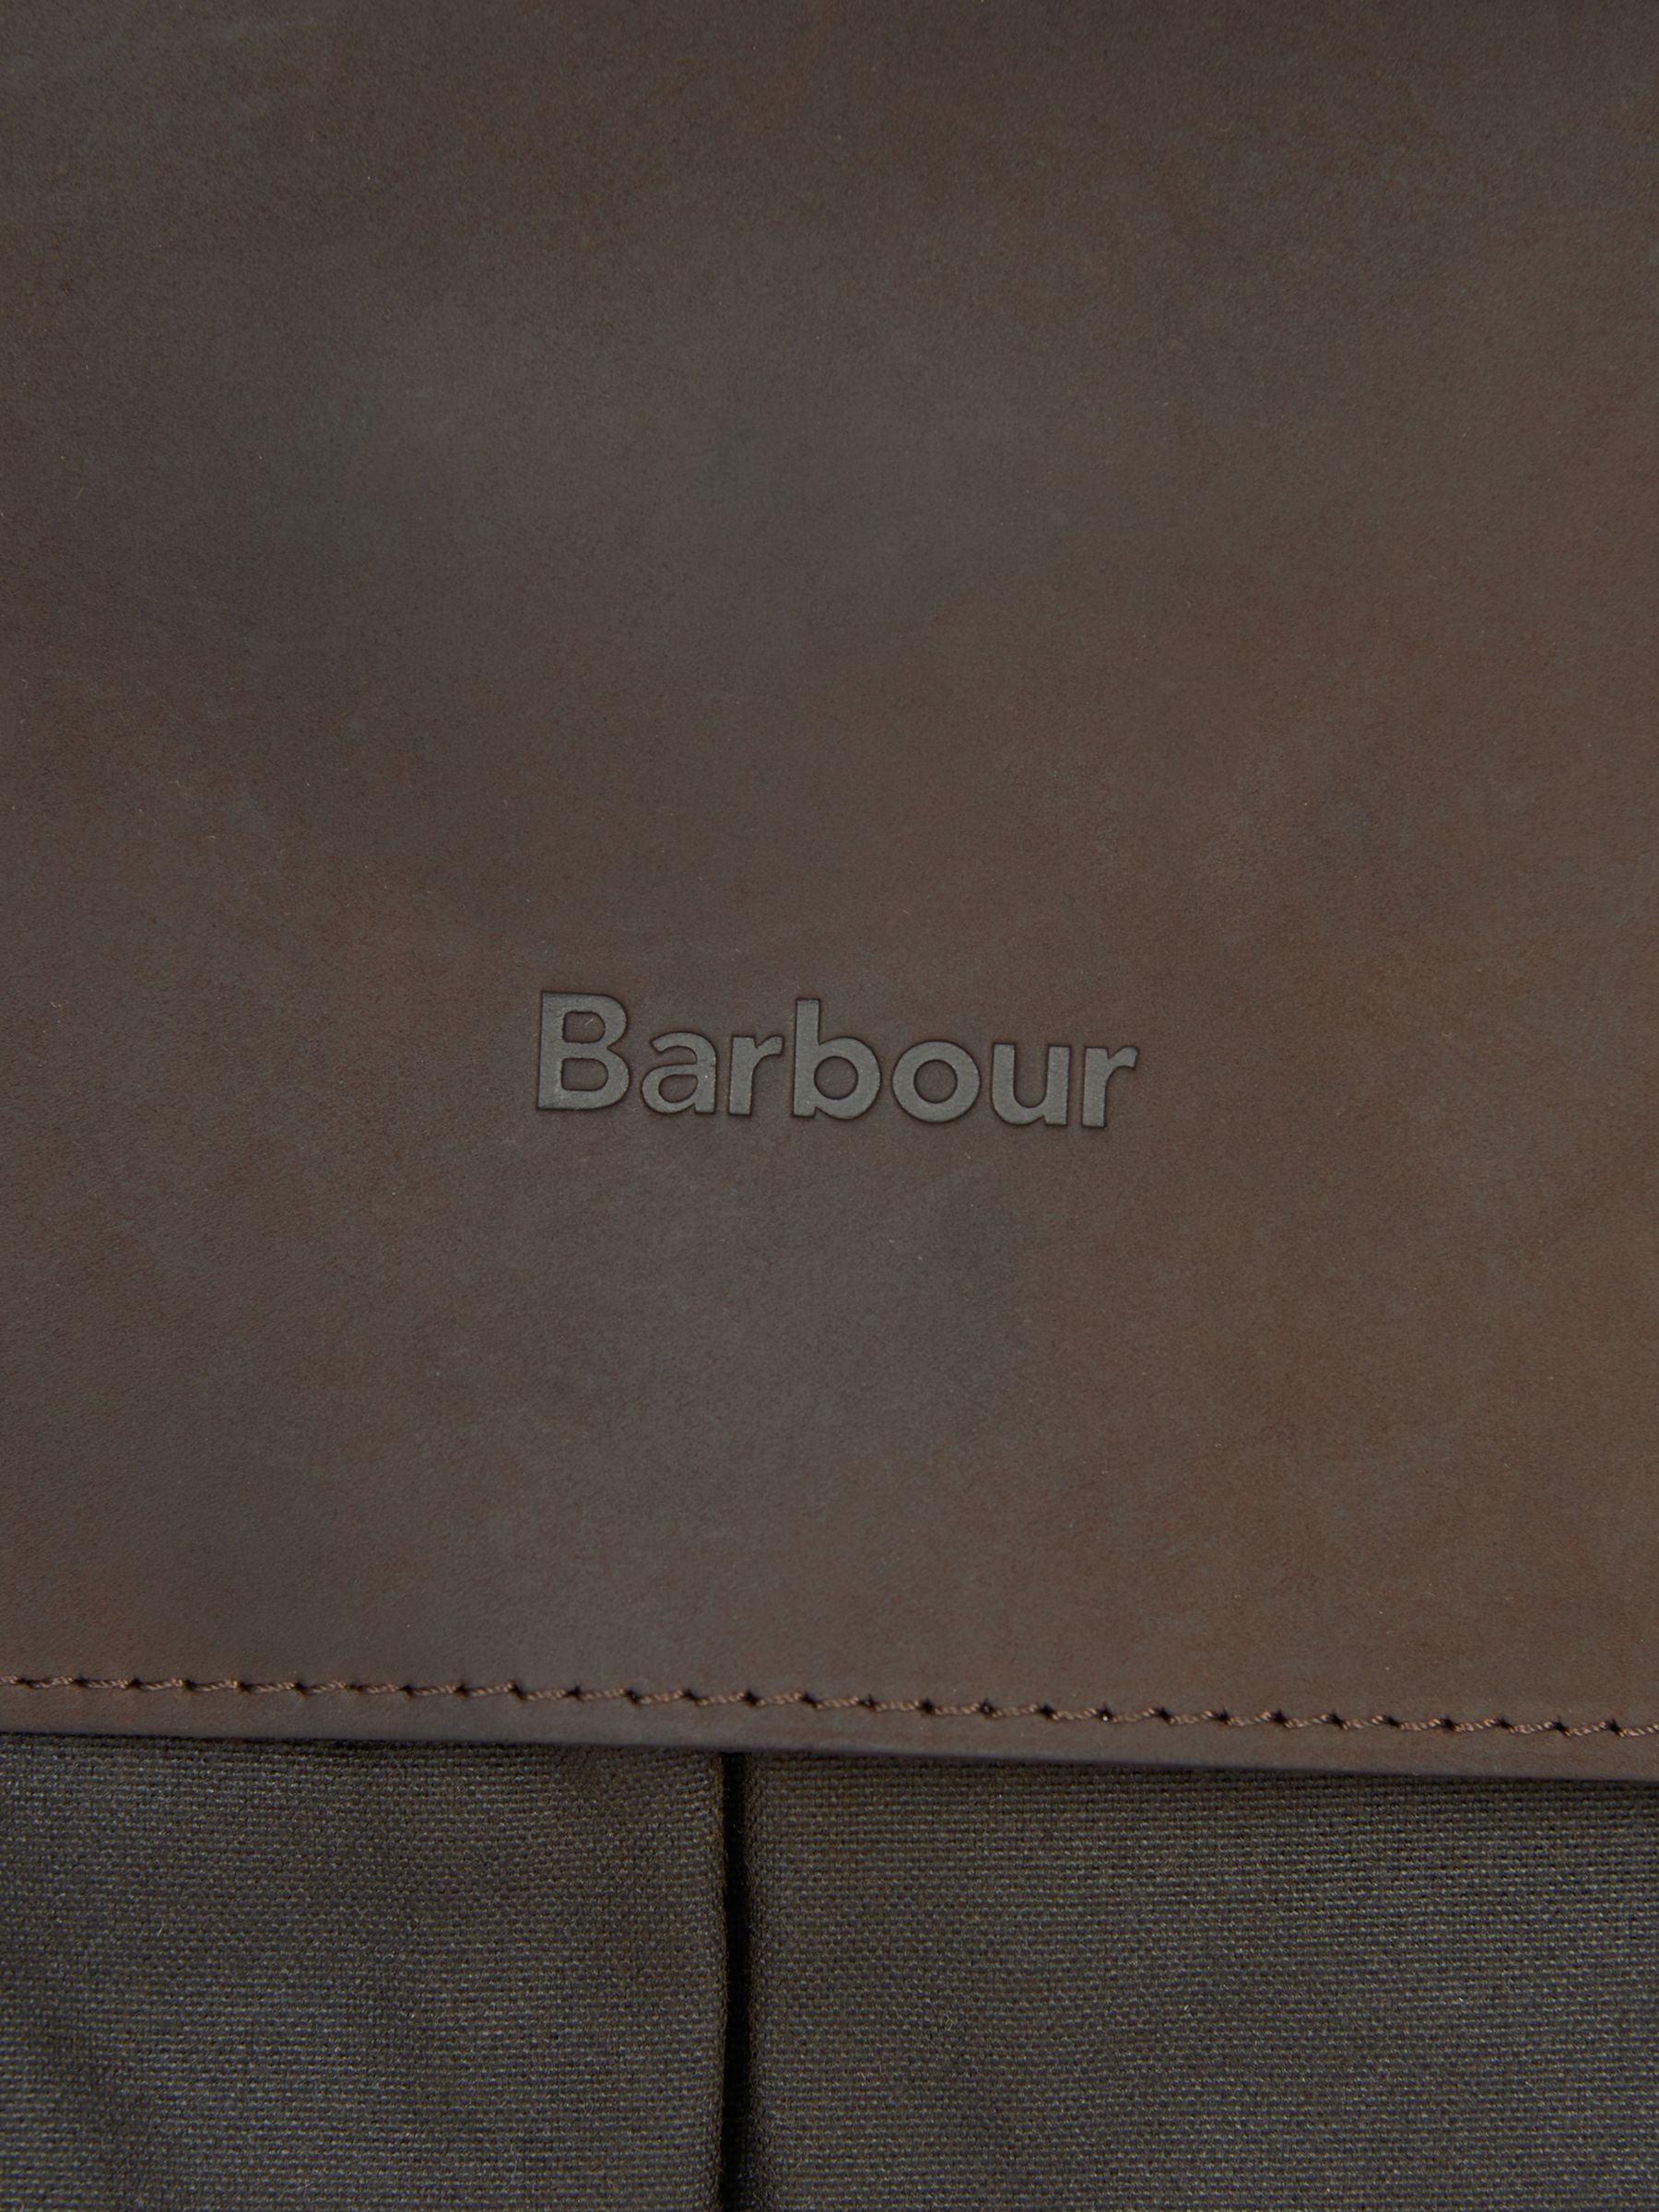 Barbour Wax Cotton and Leather Trim 